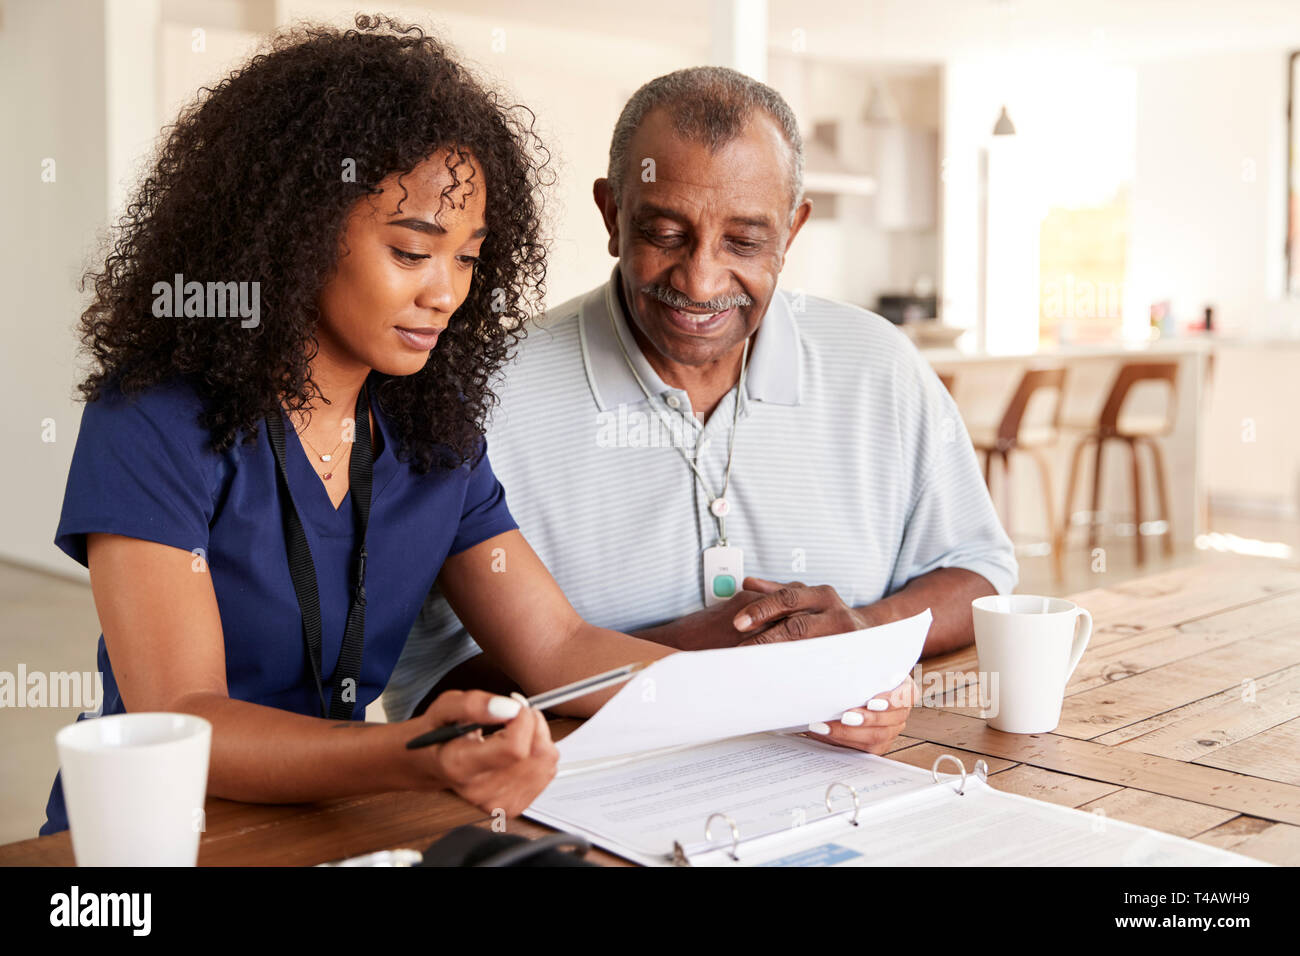 Female healthcare worker checking test results with a senior man during a home health visit Stock Photo